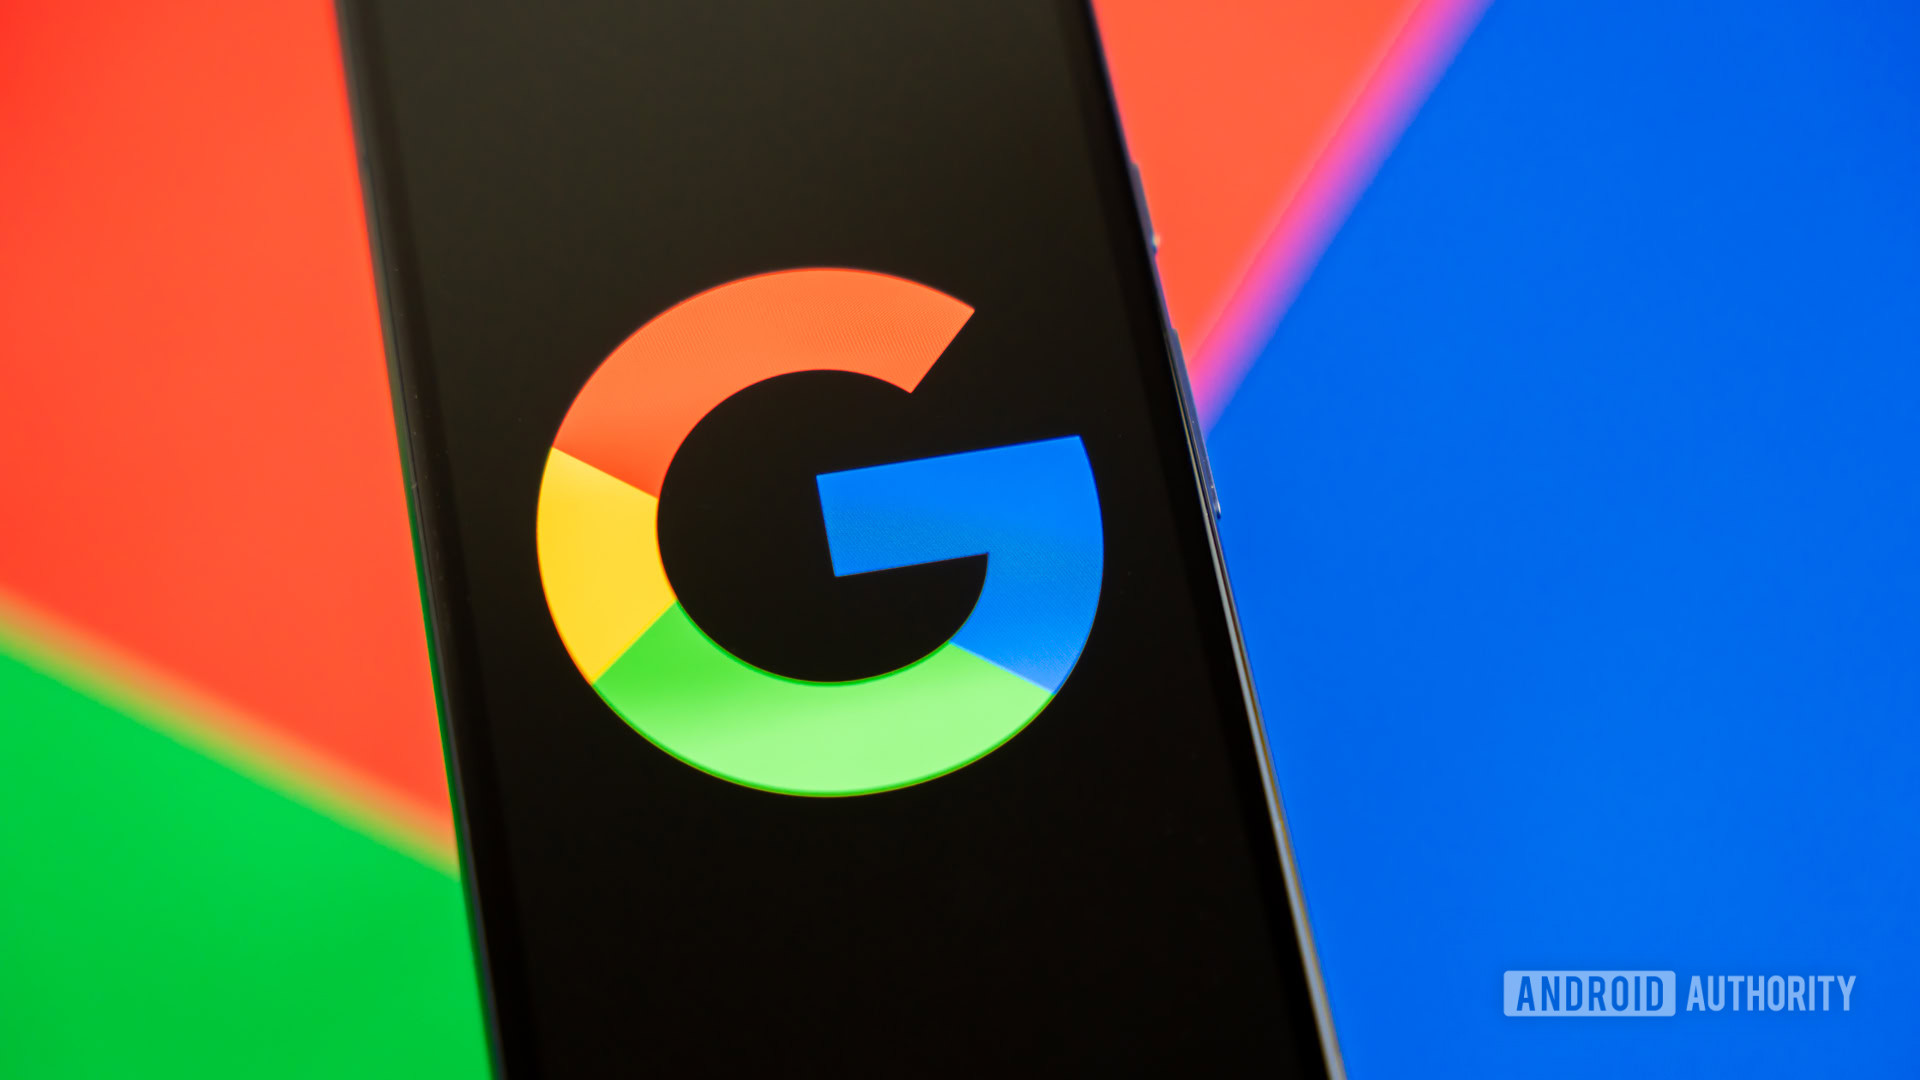 Google or Google Search logo on smartphone, with colorful background stock photo (3)